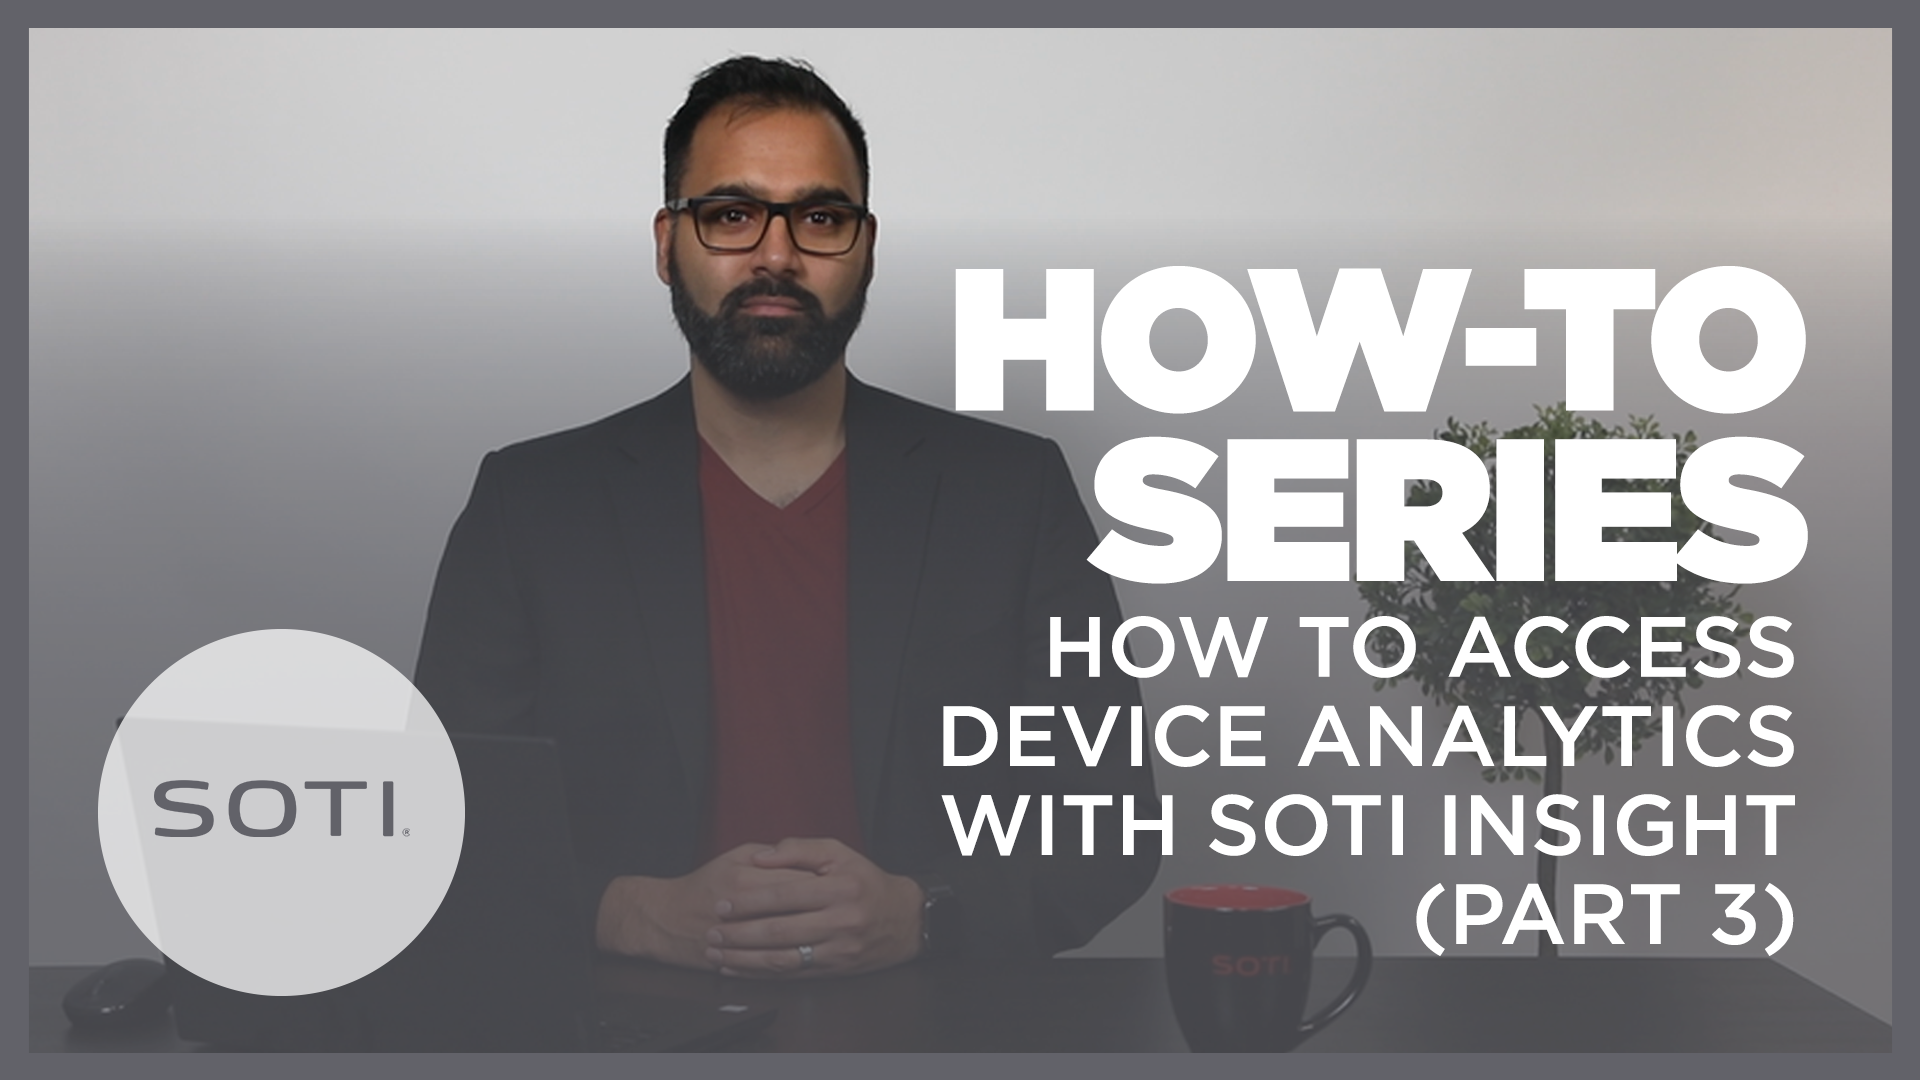 How-To: Access Device Analytics with SOTI Insight (Part 3)